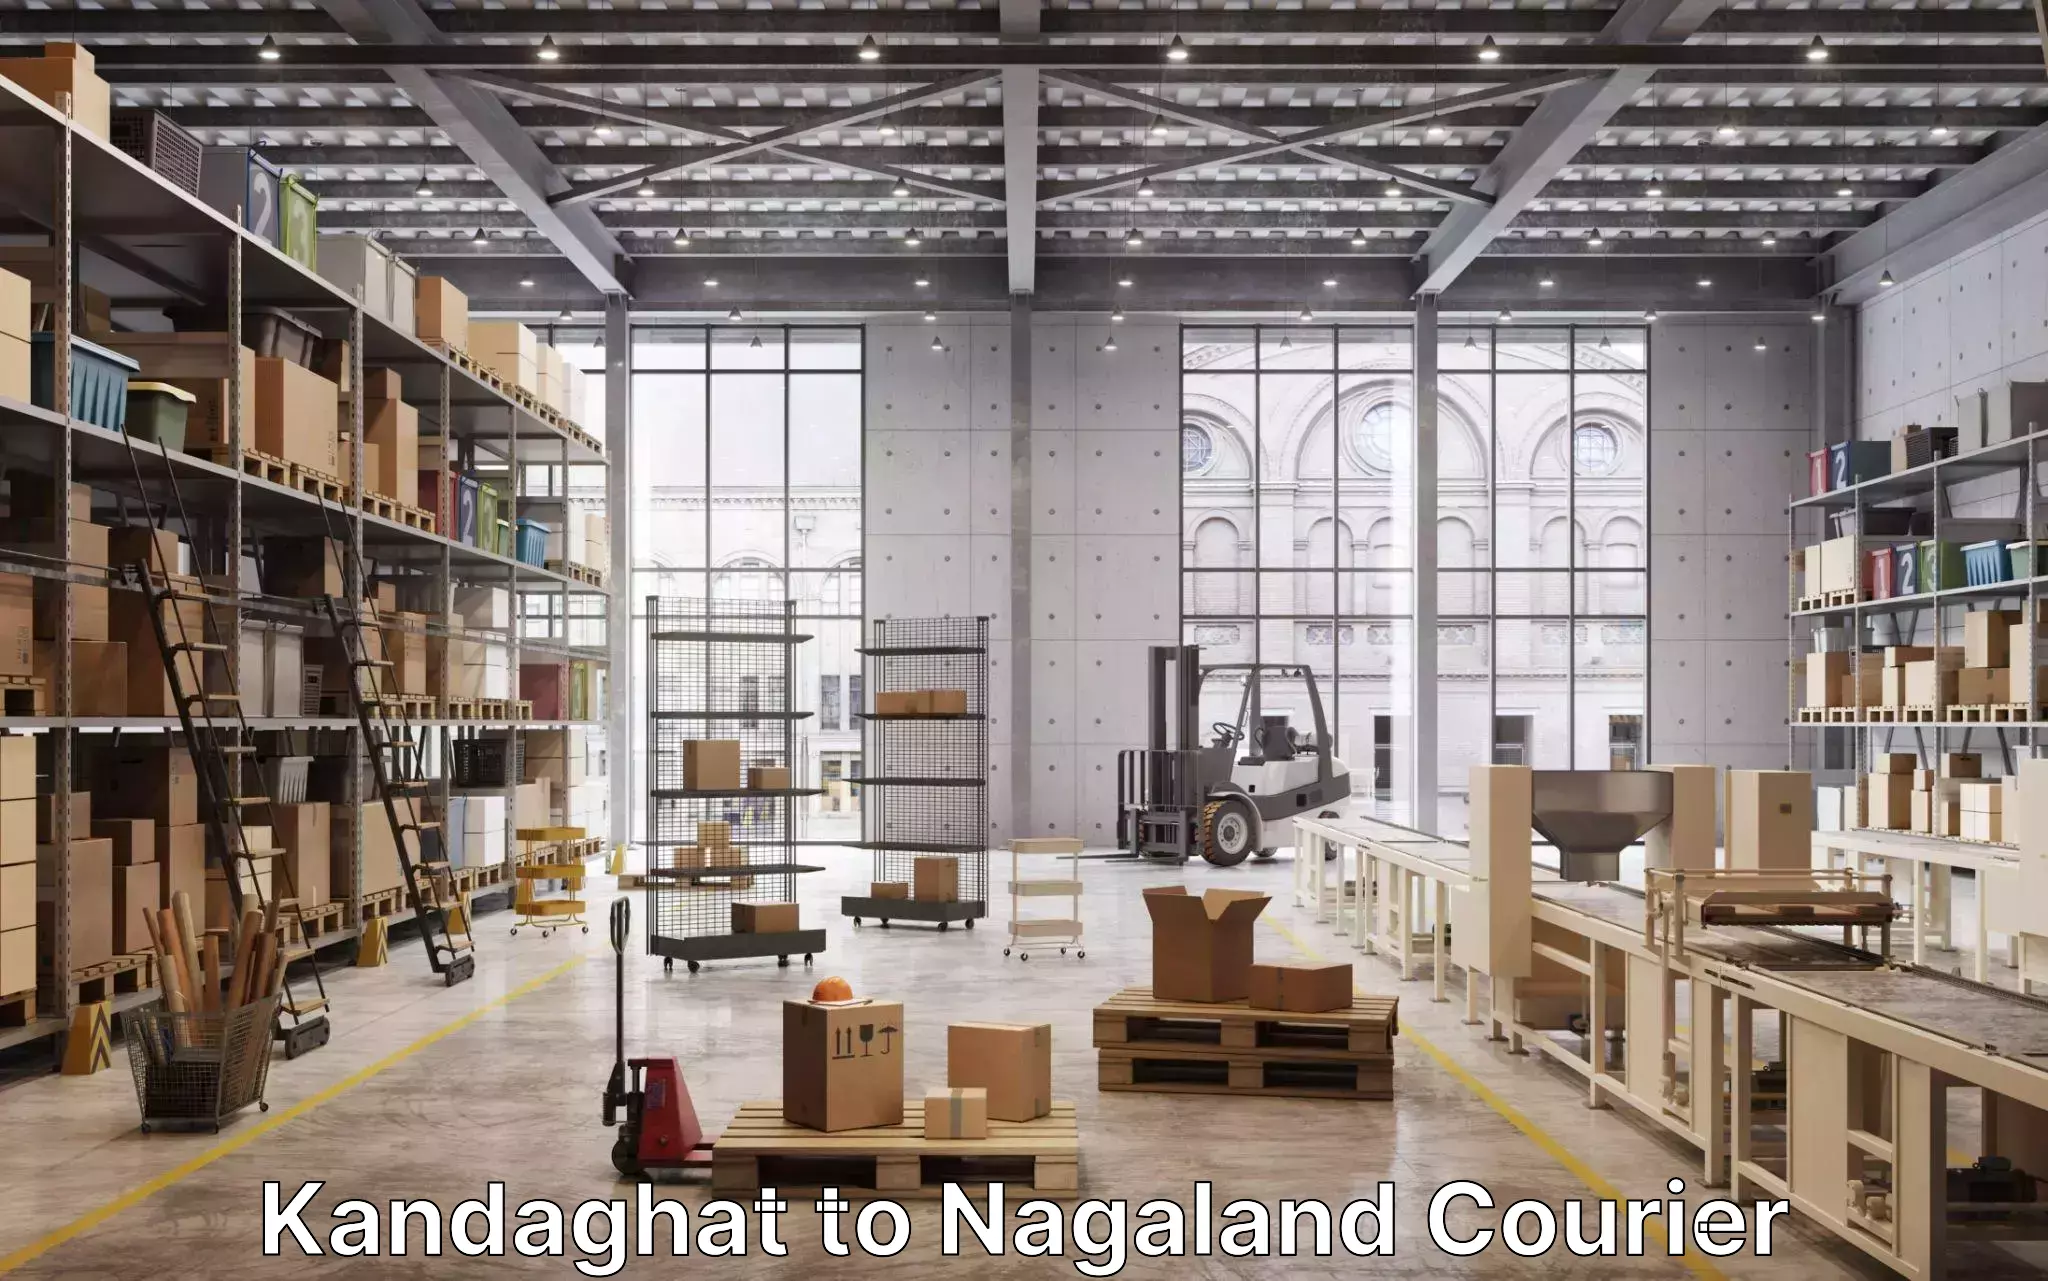 Furniture moving specialists Kandaghat to Nagaland